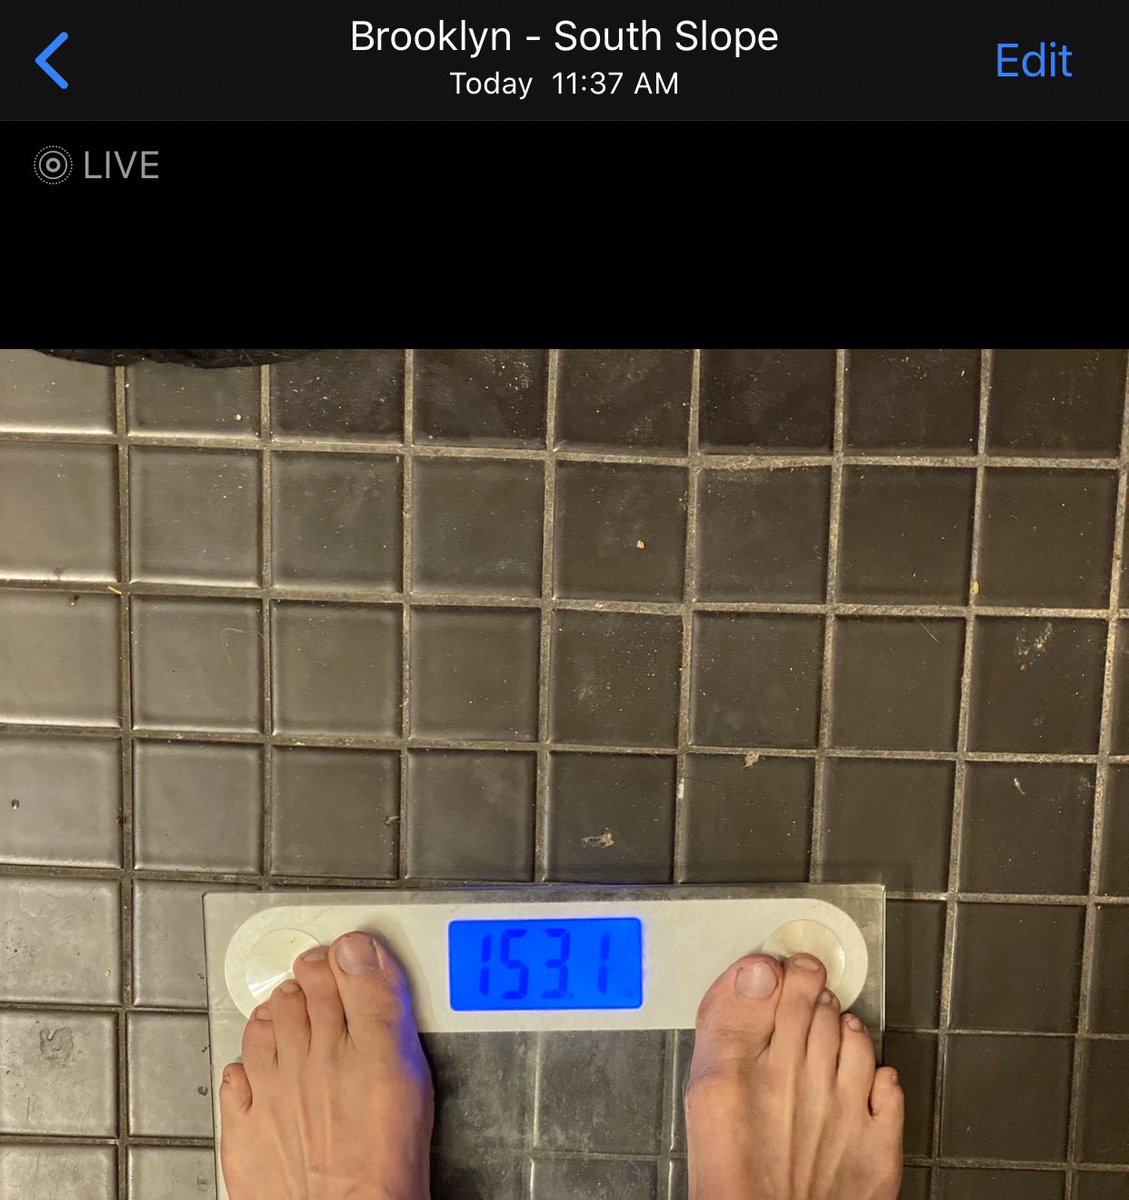 Photo proof. And no I’m not holding a 20 pound weight.